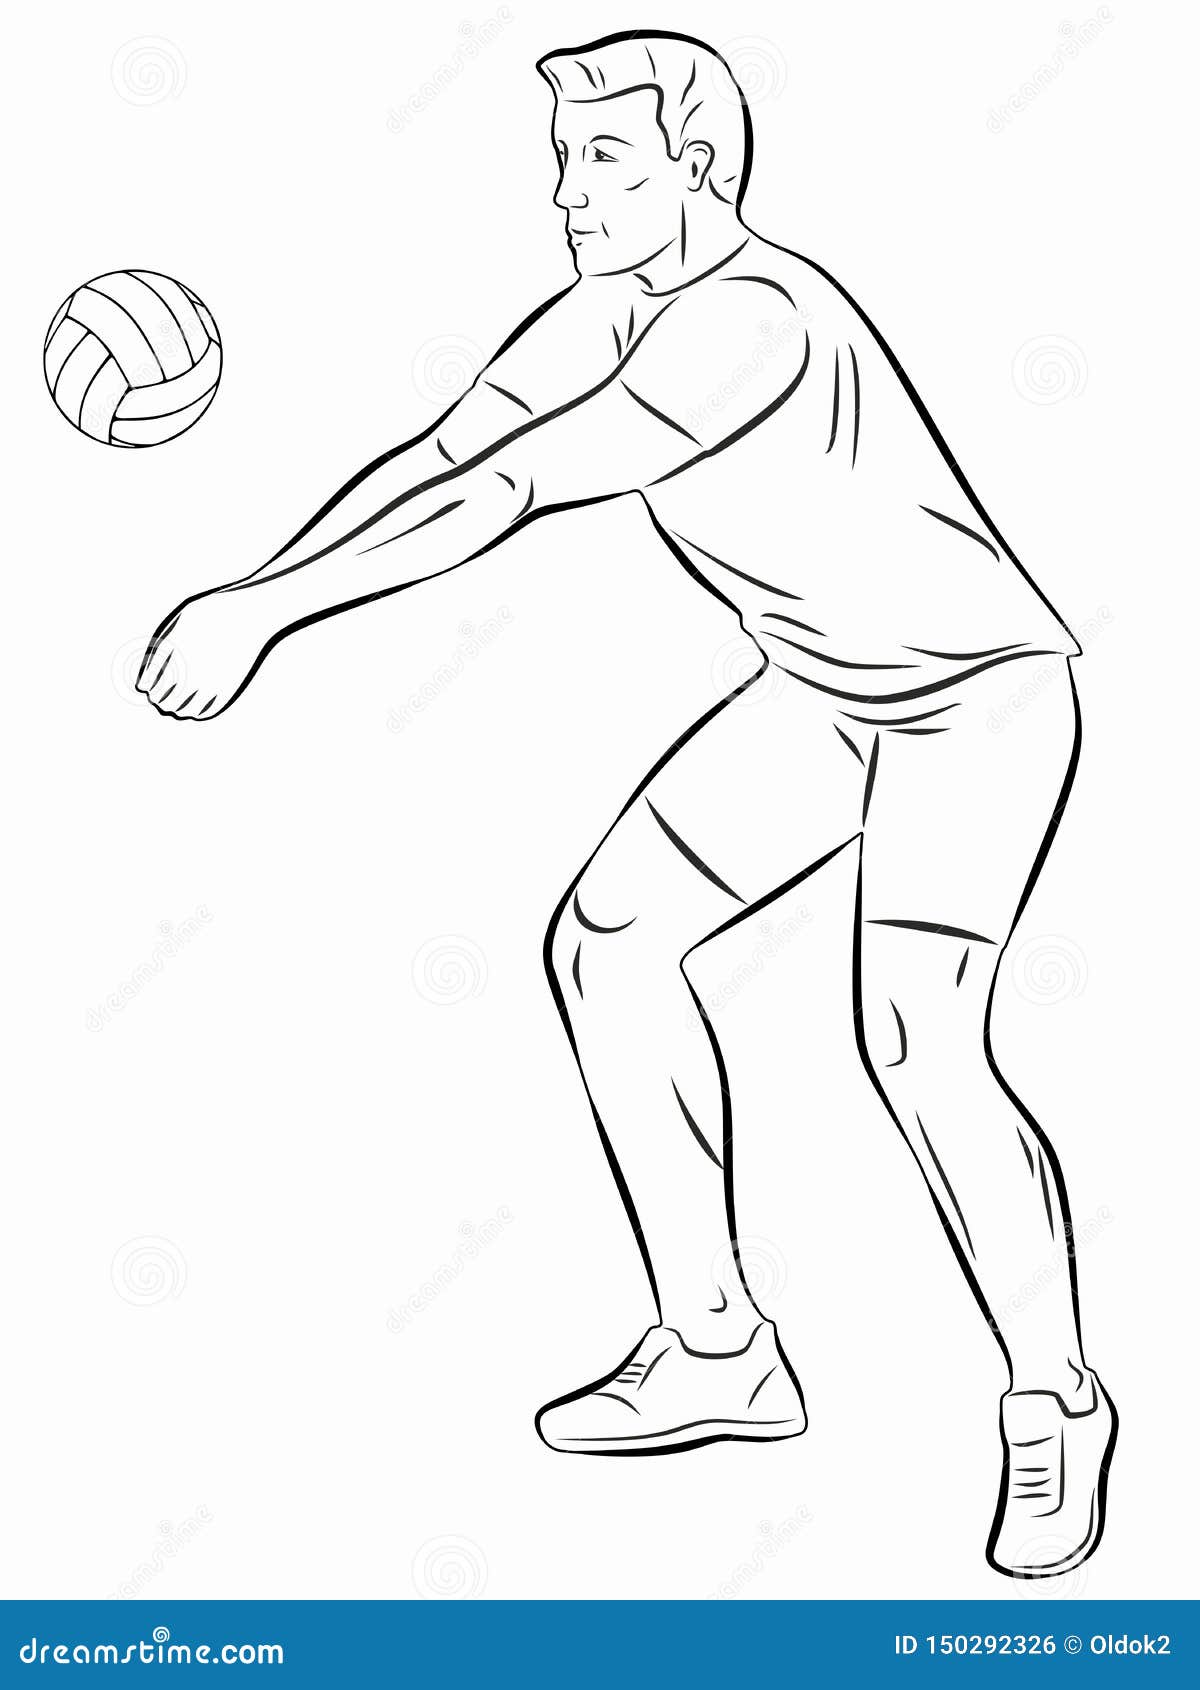 Volleyball Pencil Drawing